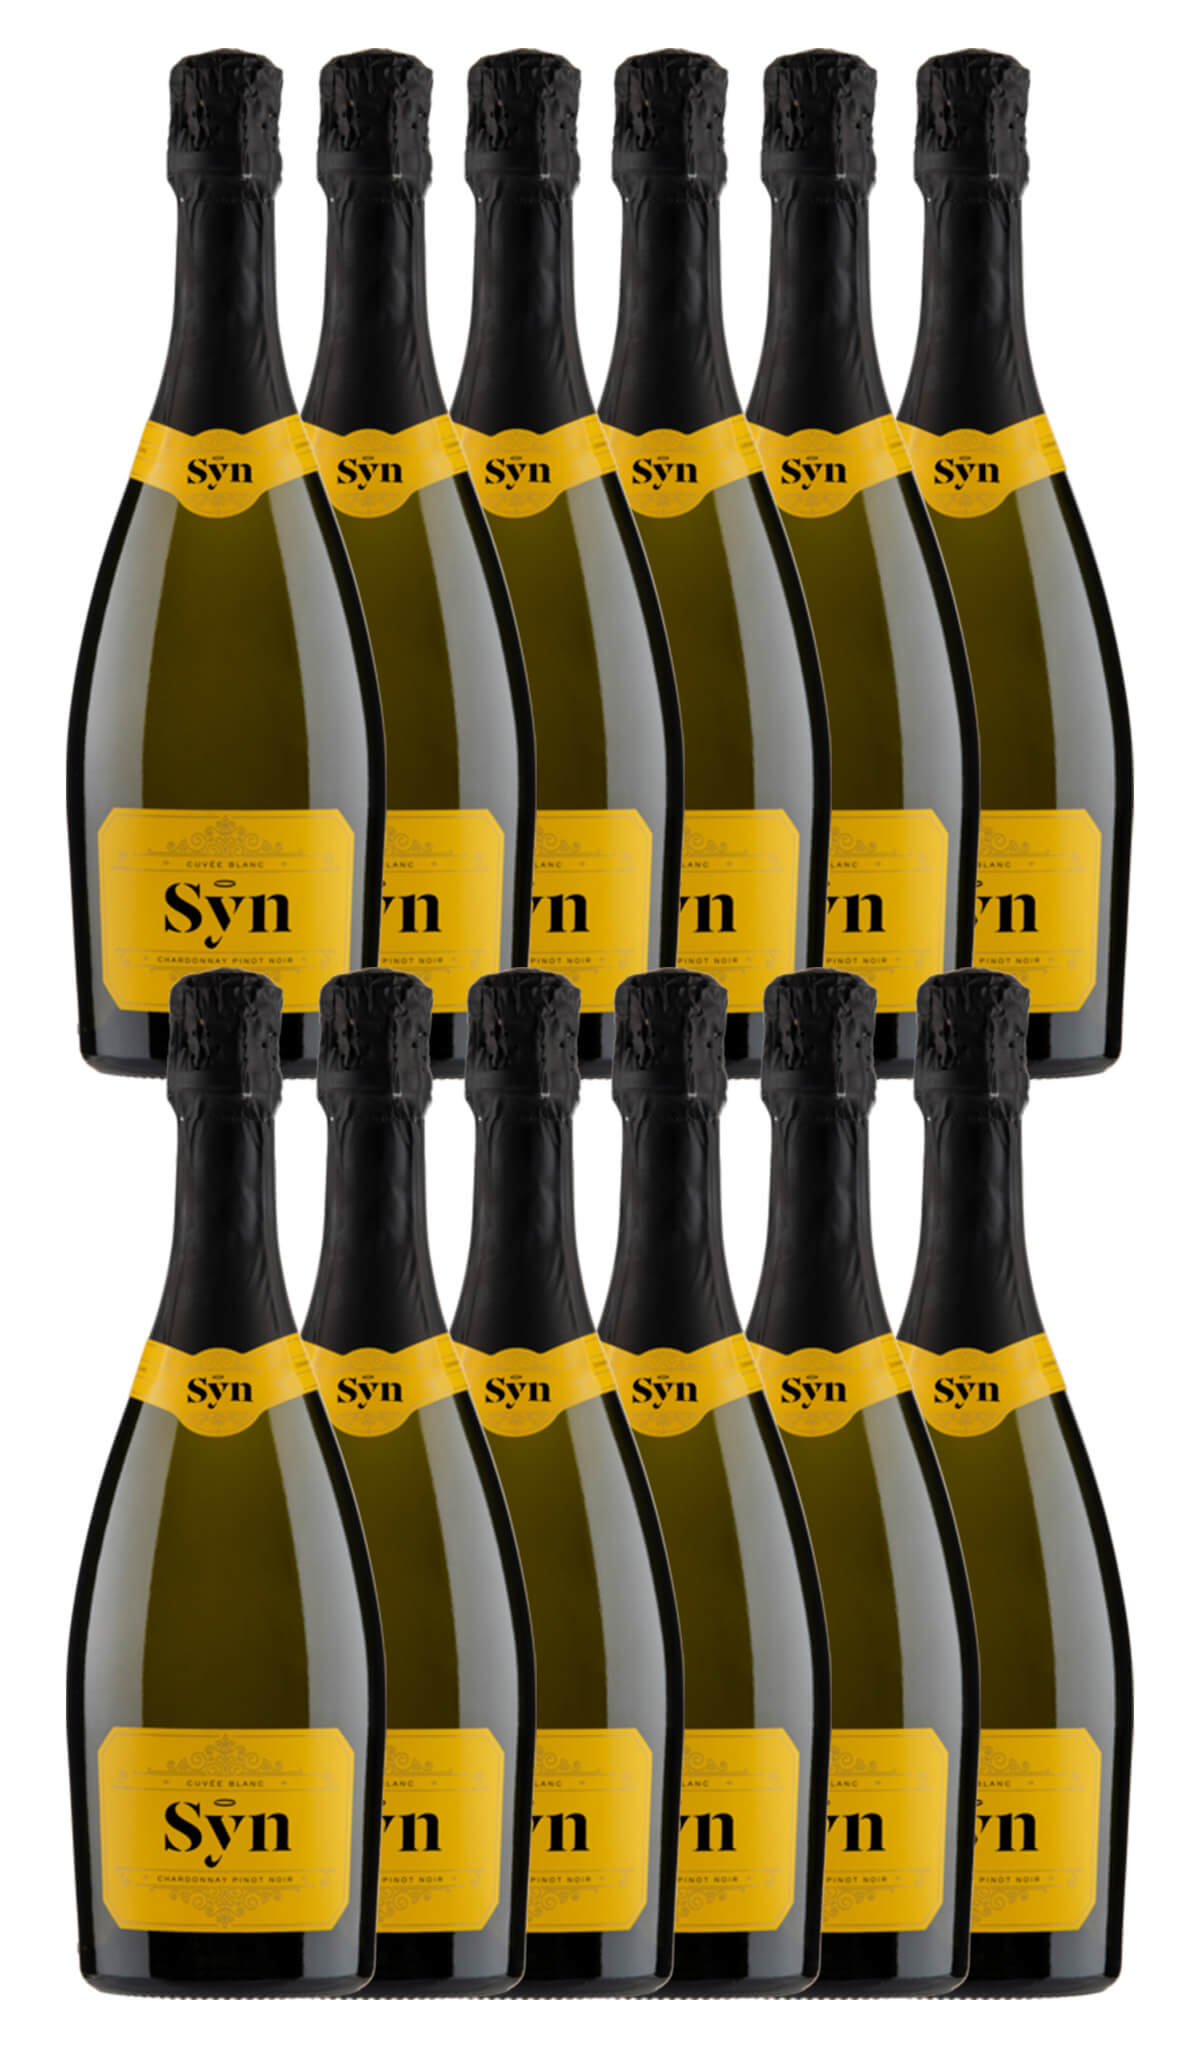 Find out more, explore the range and purchase Syn Chardonnay Pinot Noir NV (Coonawarra) dozen wine deal online at Wine Sellers Direct - Australia's independent liquor specialists.